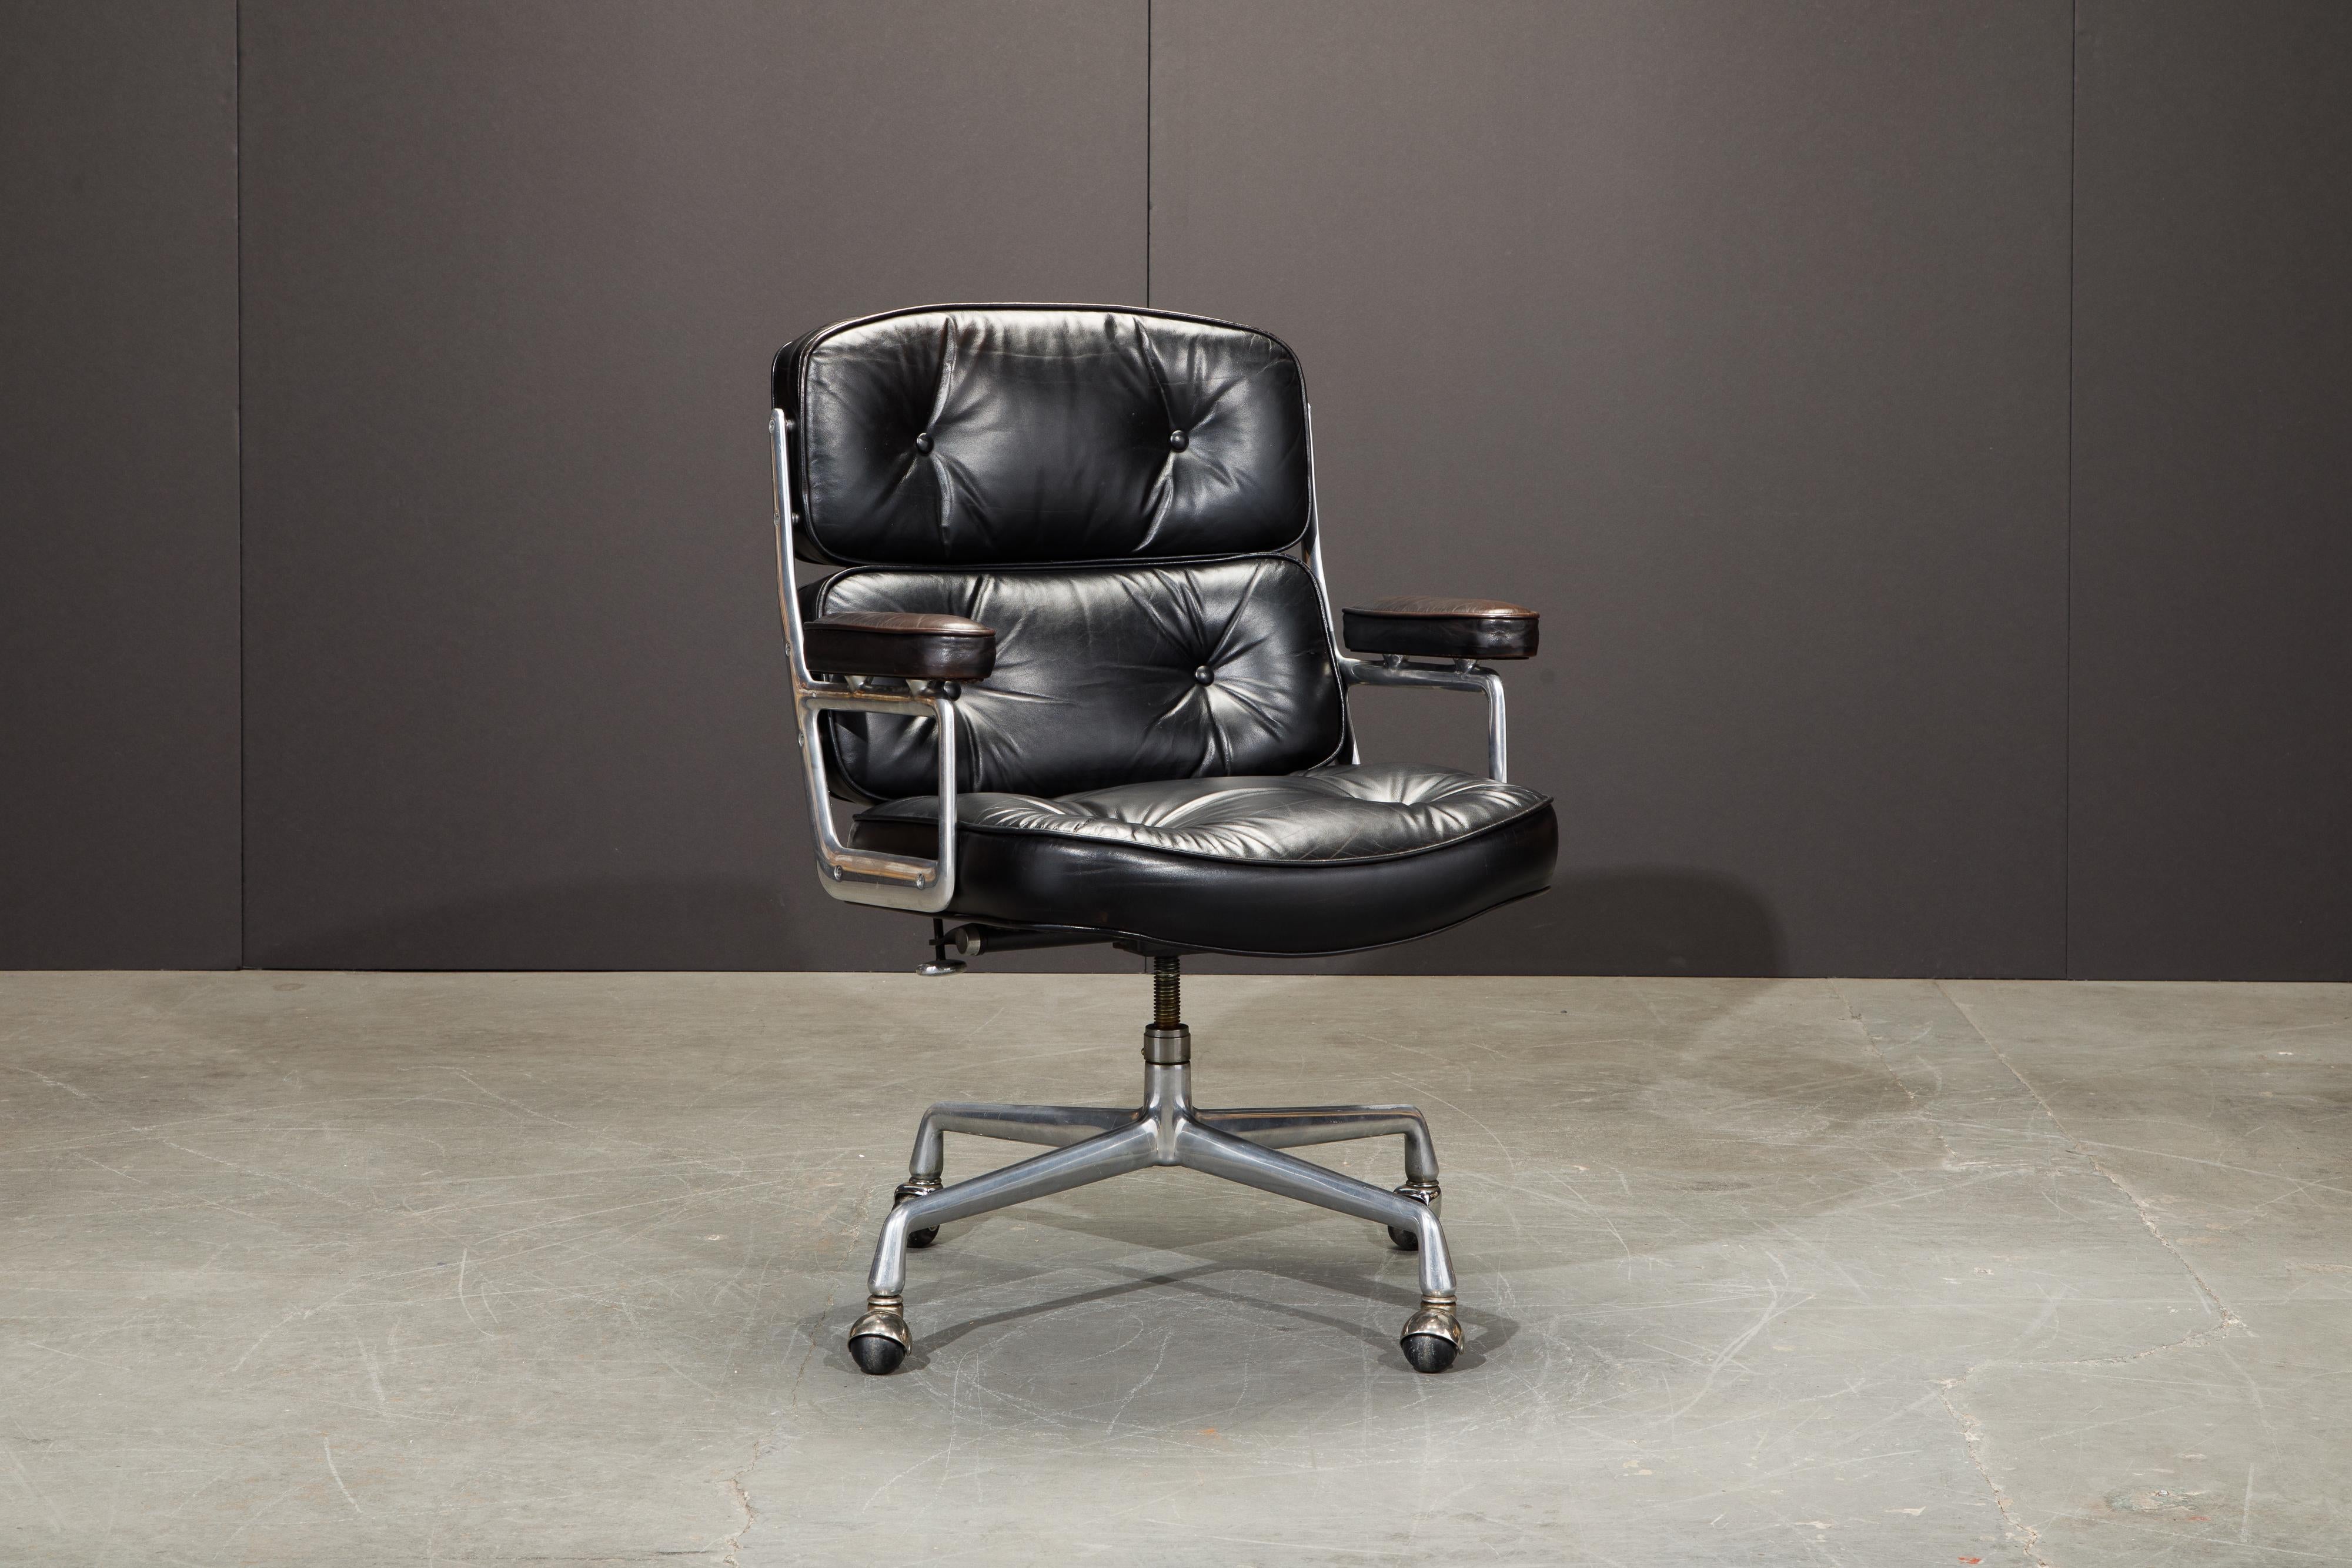 The ultimate desk chair and timeless classic by Charles and Ray Eames for Herman Miller. This early production collectors example of the Time Life 'Executive' chair was originally designed for the Time Life building hence the chair's name. This Time